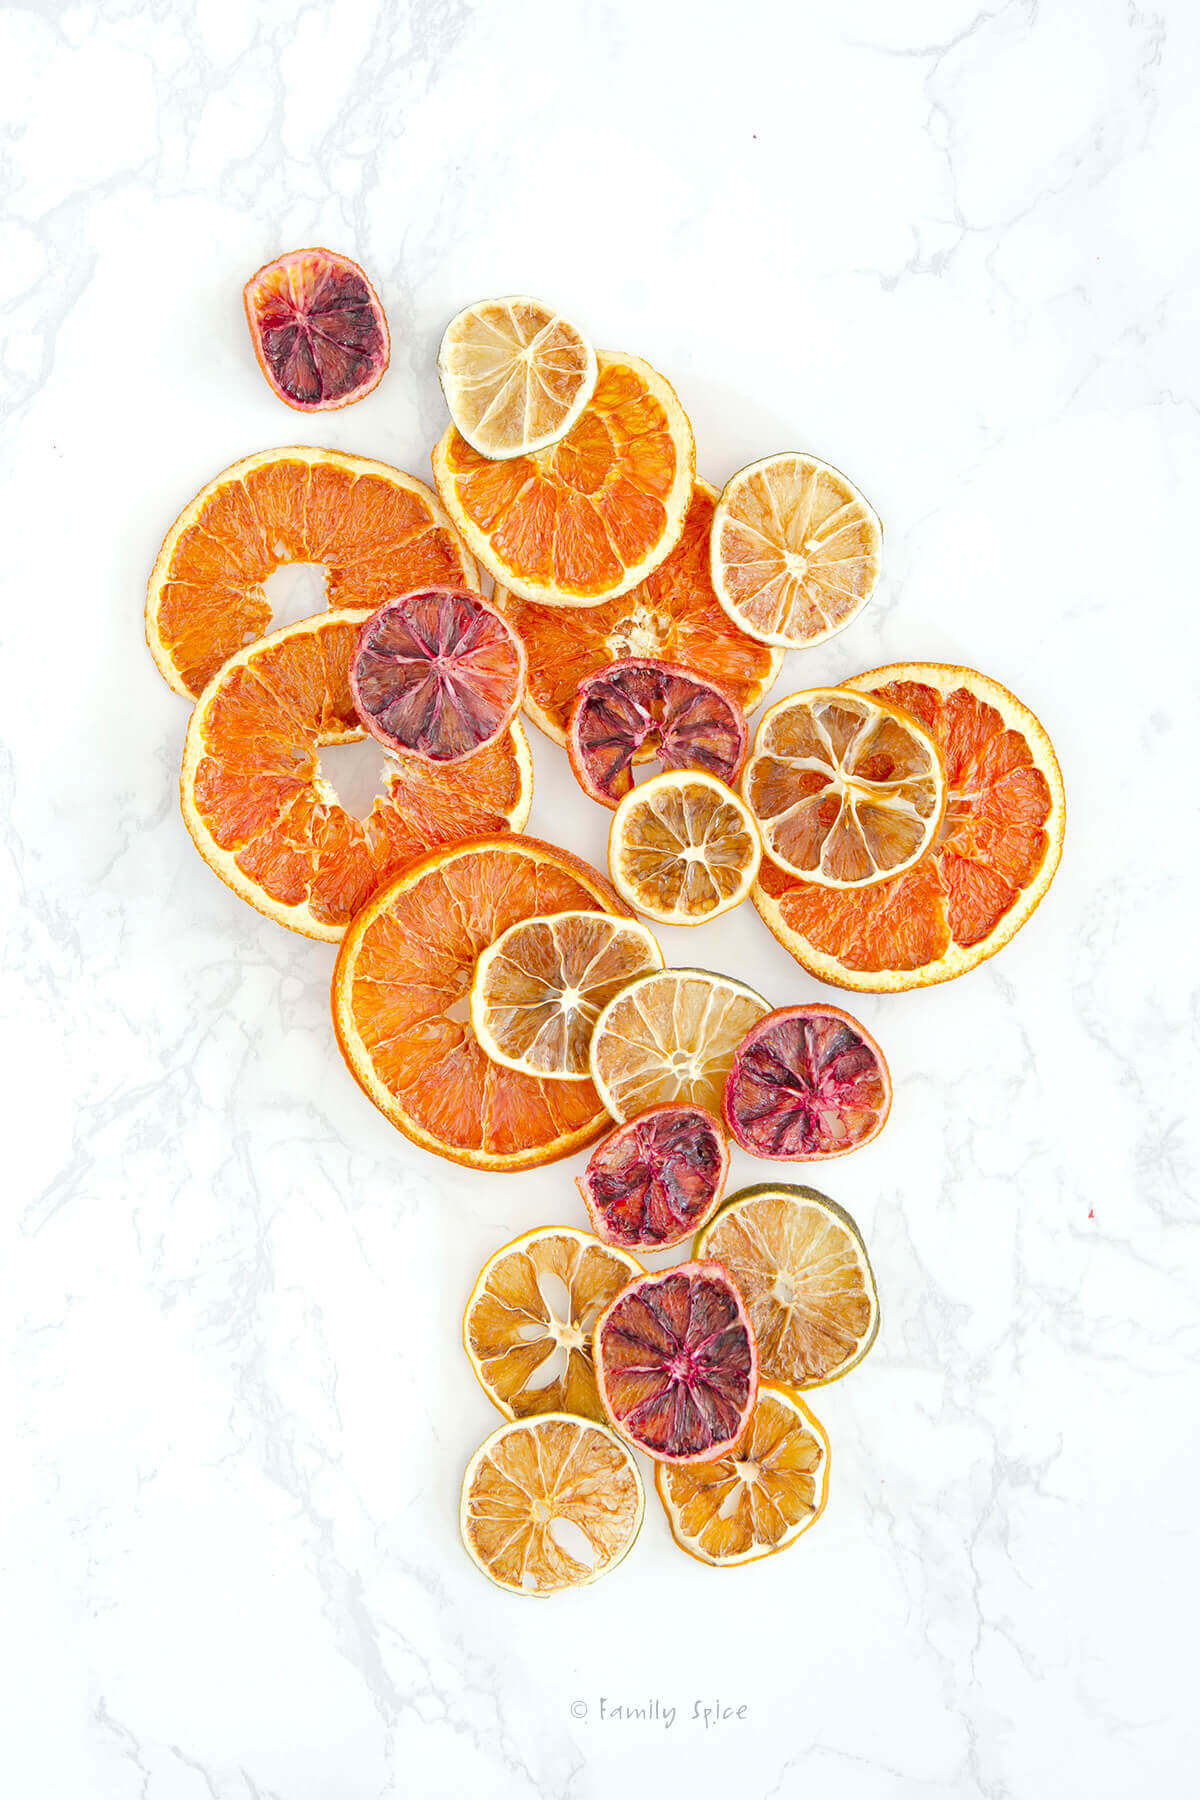 Overhead shot of dried oranges, dried lemons, dried limes and dried blood oranges